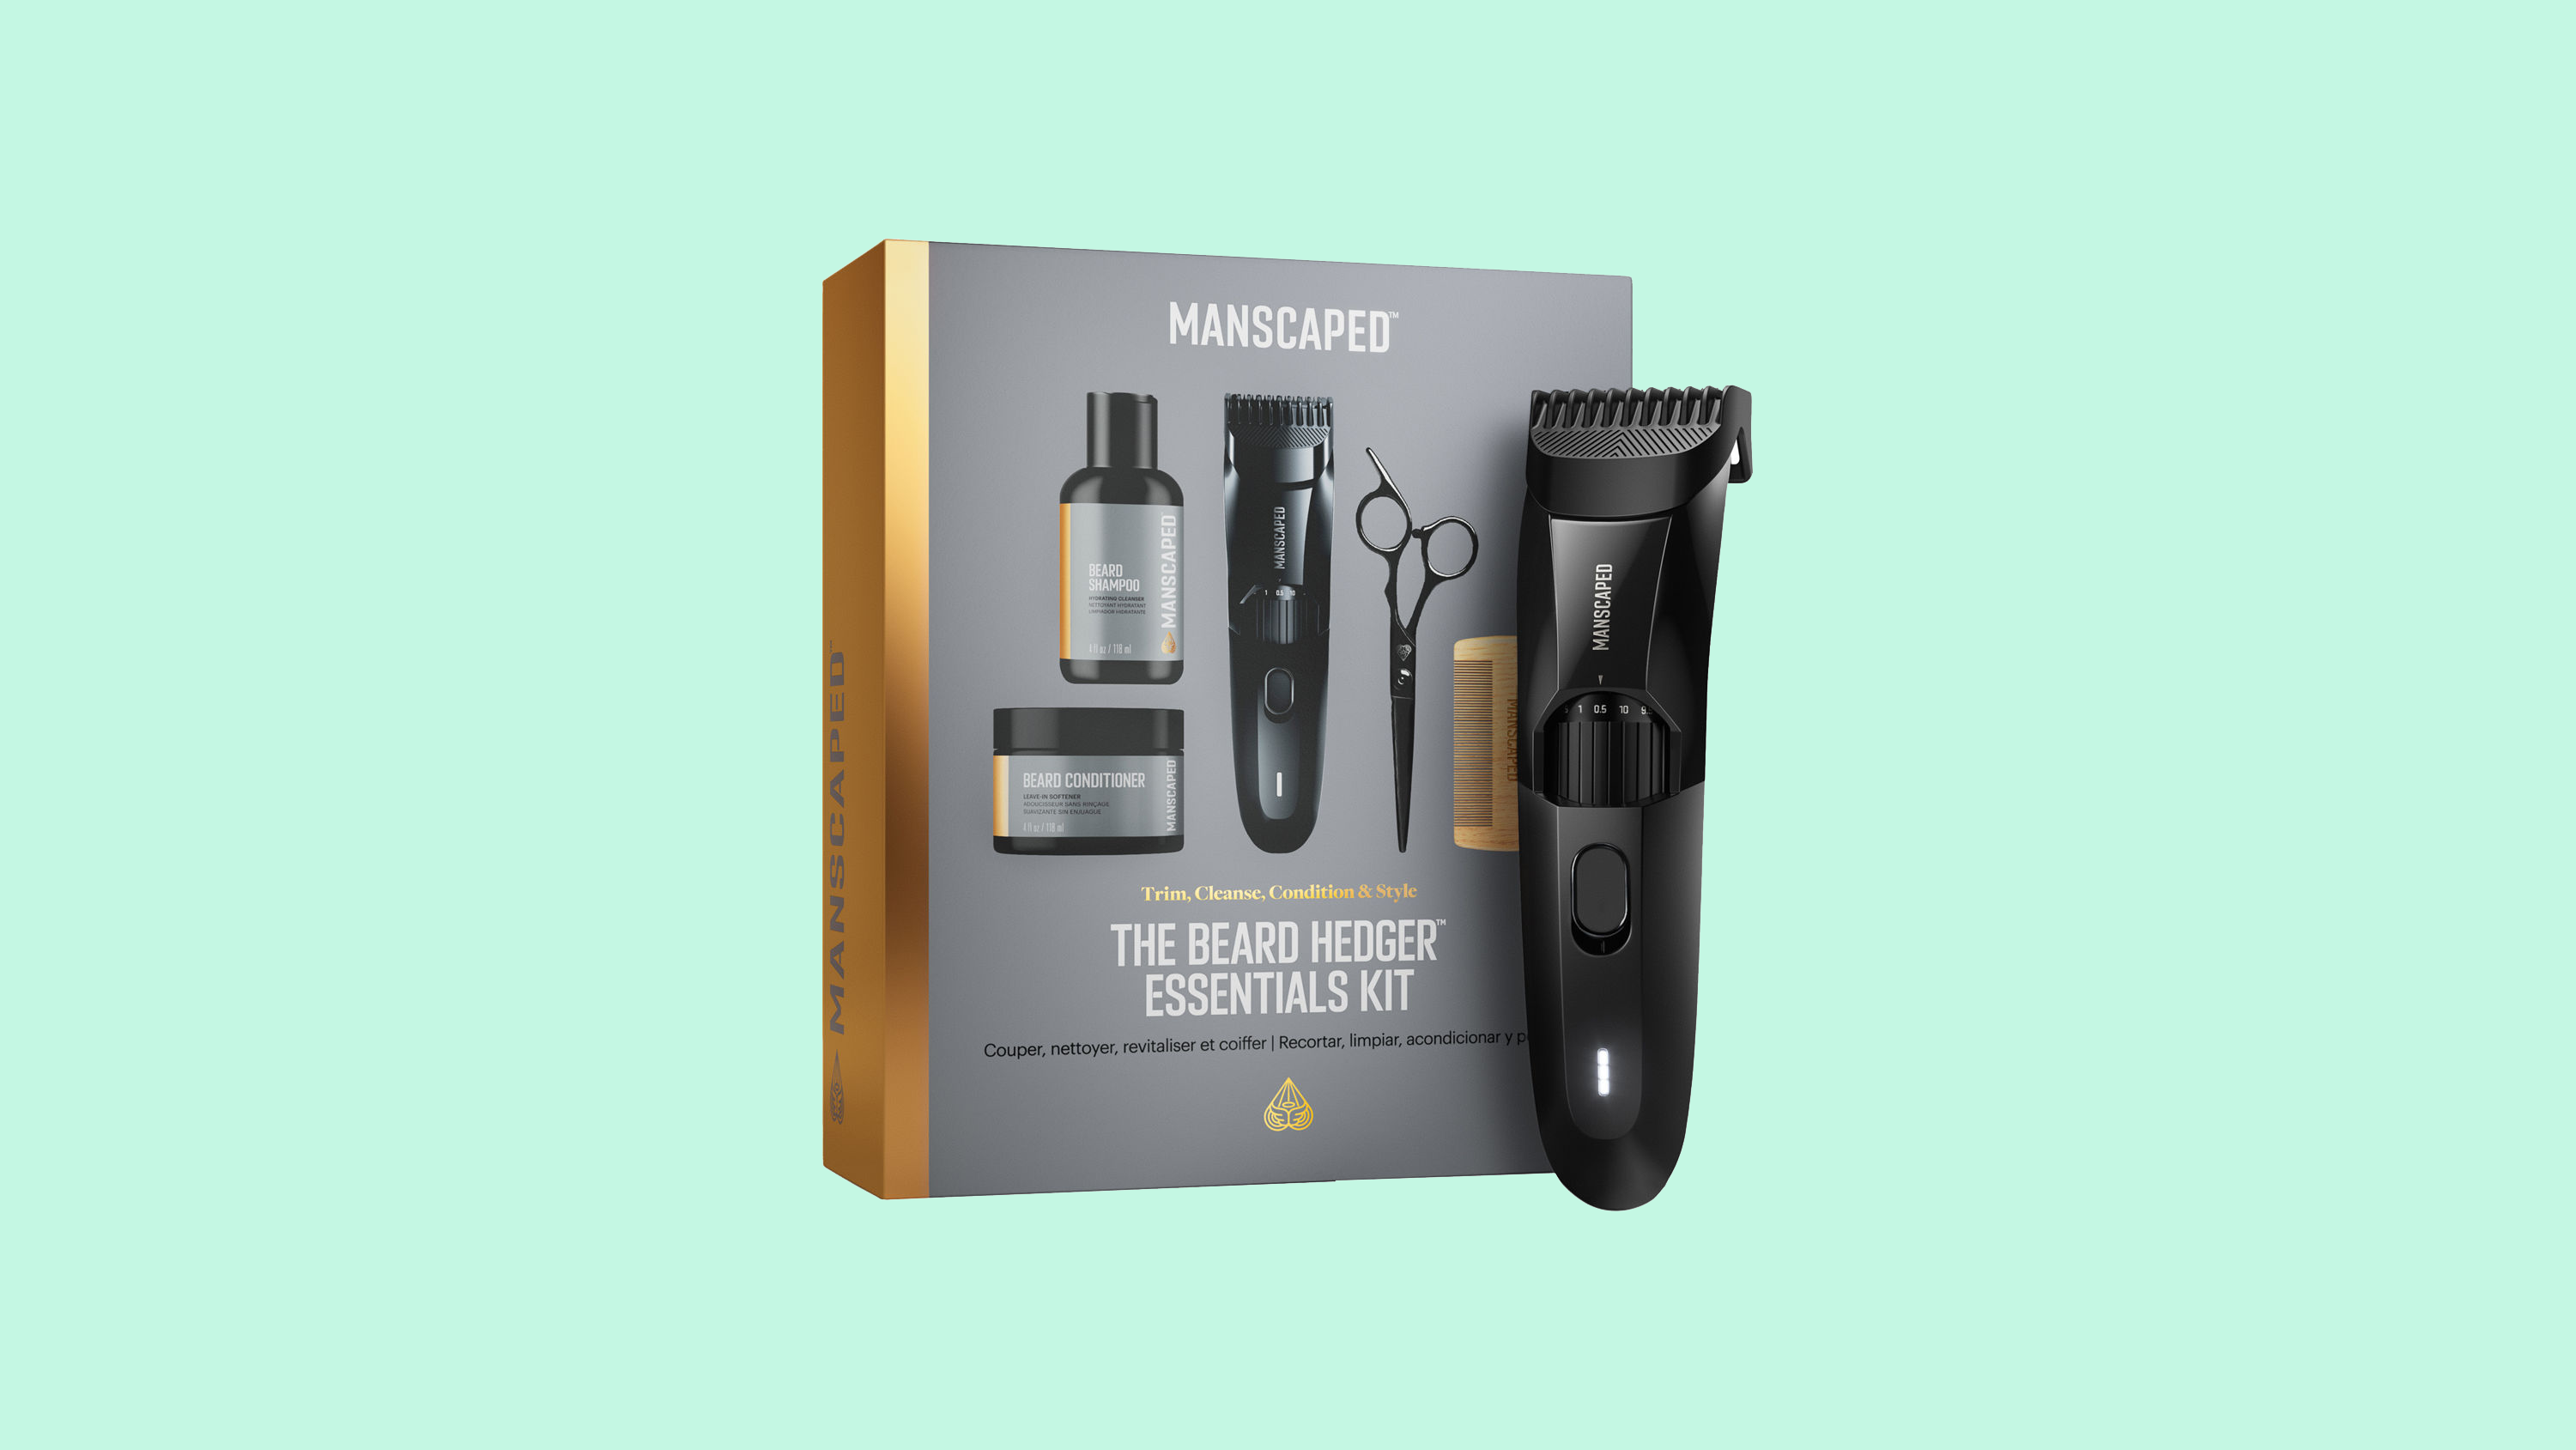 Best gifts for men: Manscaped